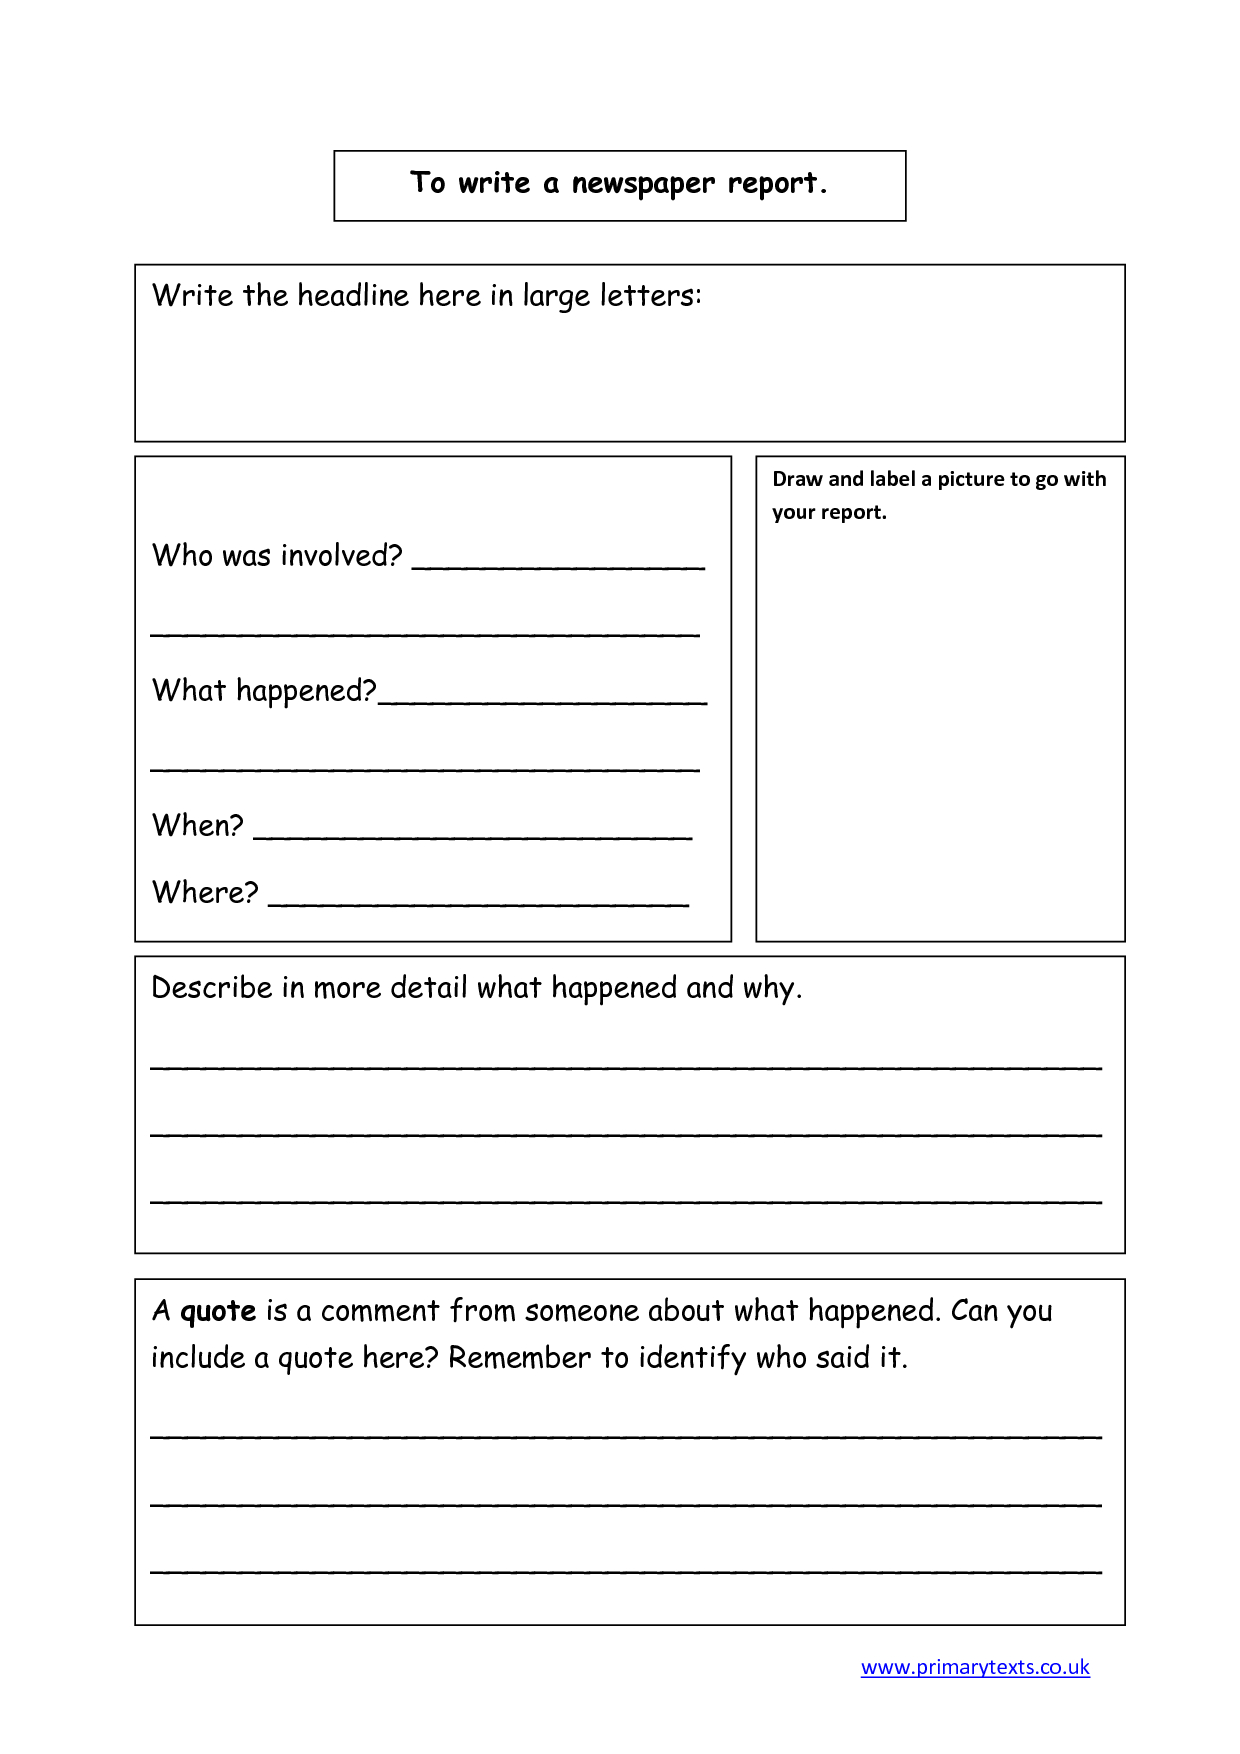 science-report-template-ks2-10-examples-of-professional-templates-ideas